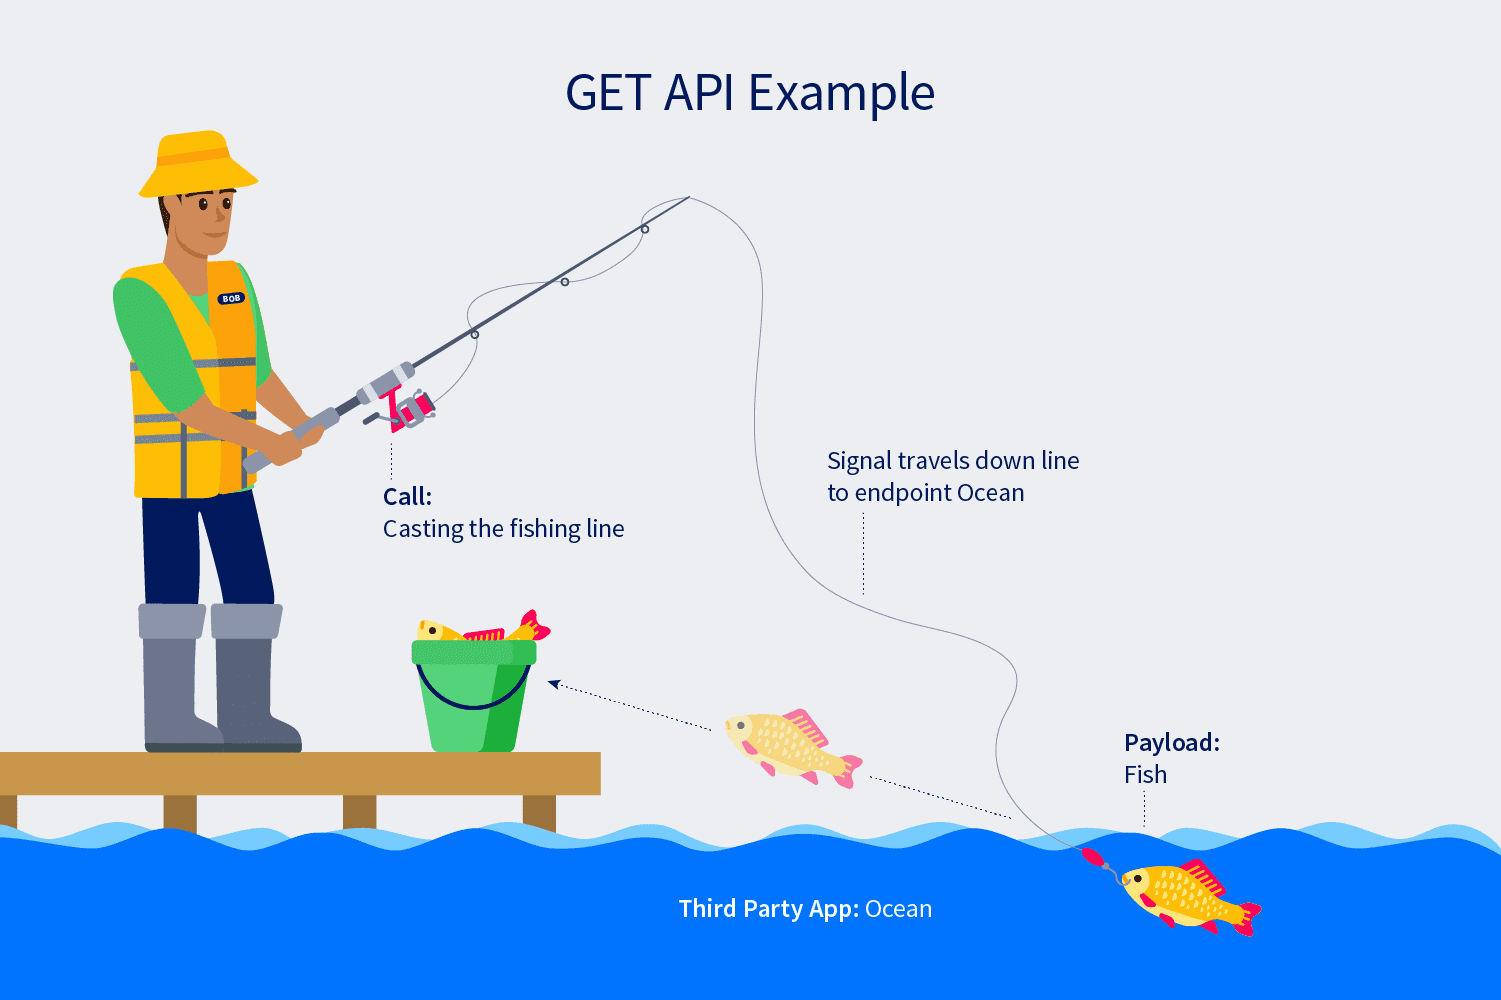 GET APIs are read-only requests used for retrieving information